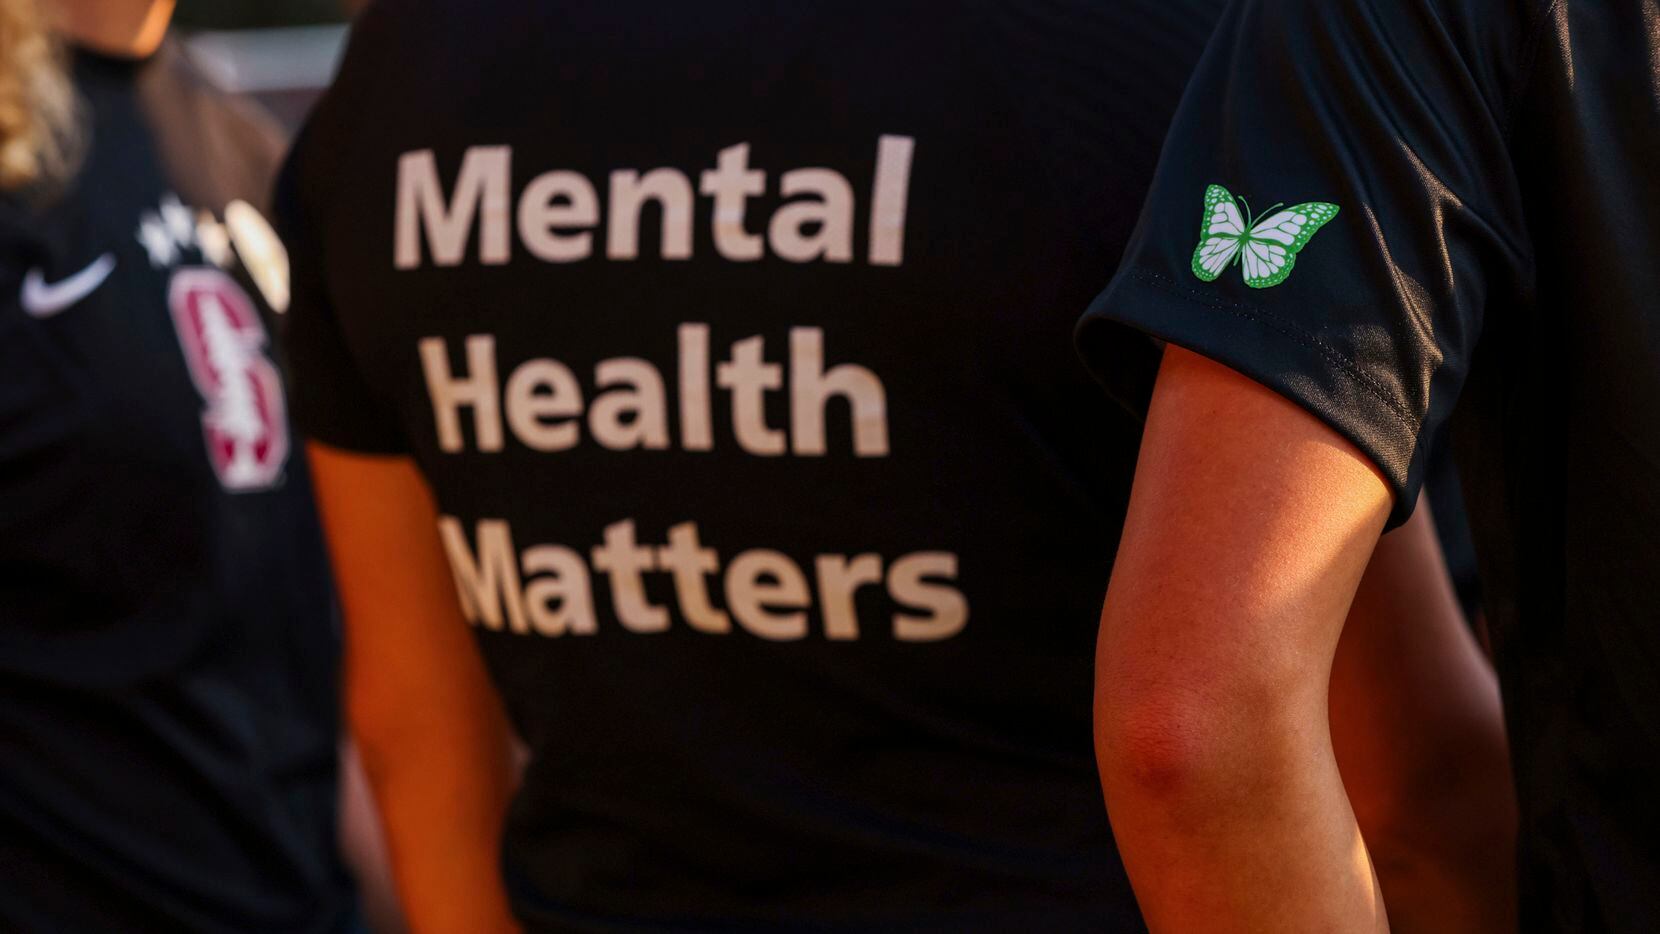 Stanford women's soccer team players wear warmup jerseys with "Mental Health Matters" on...